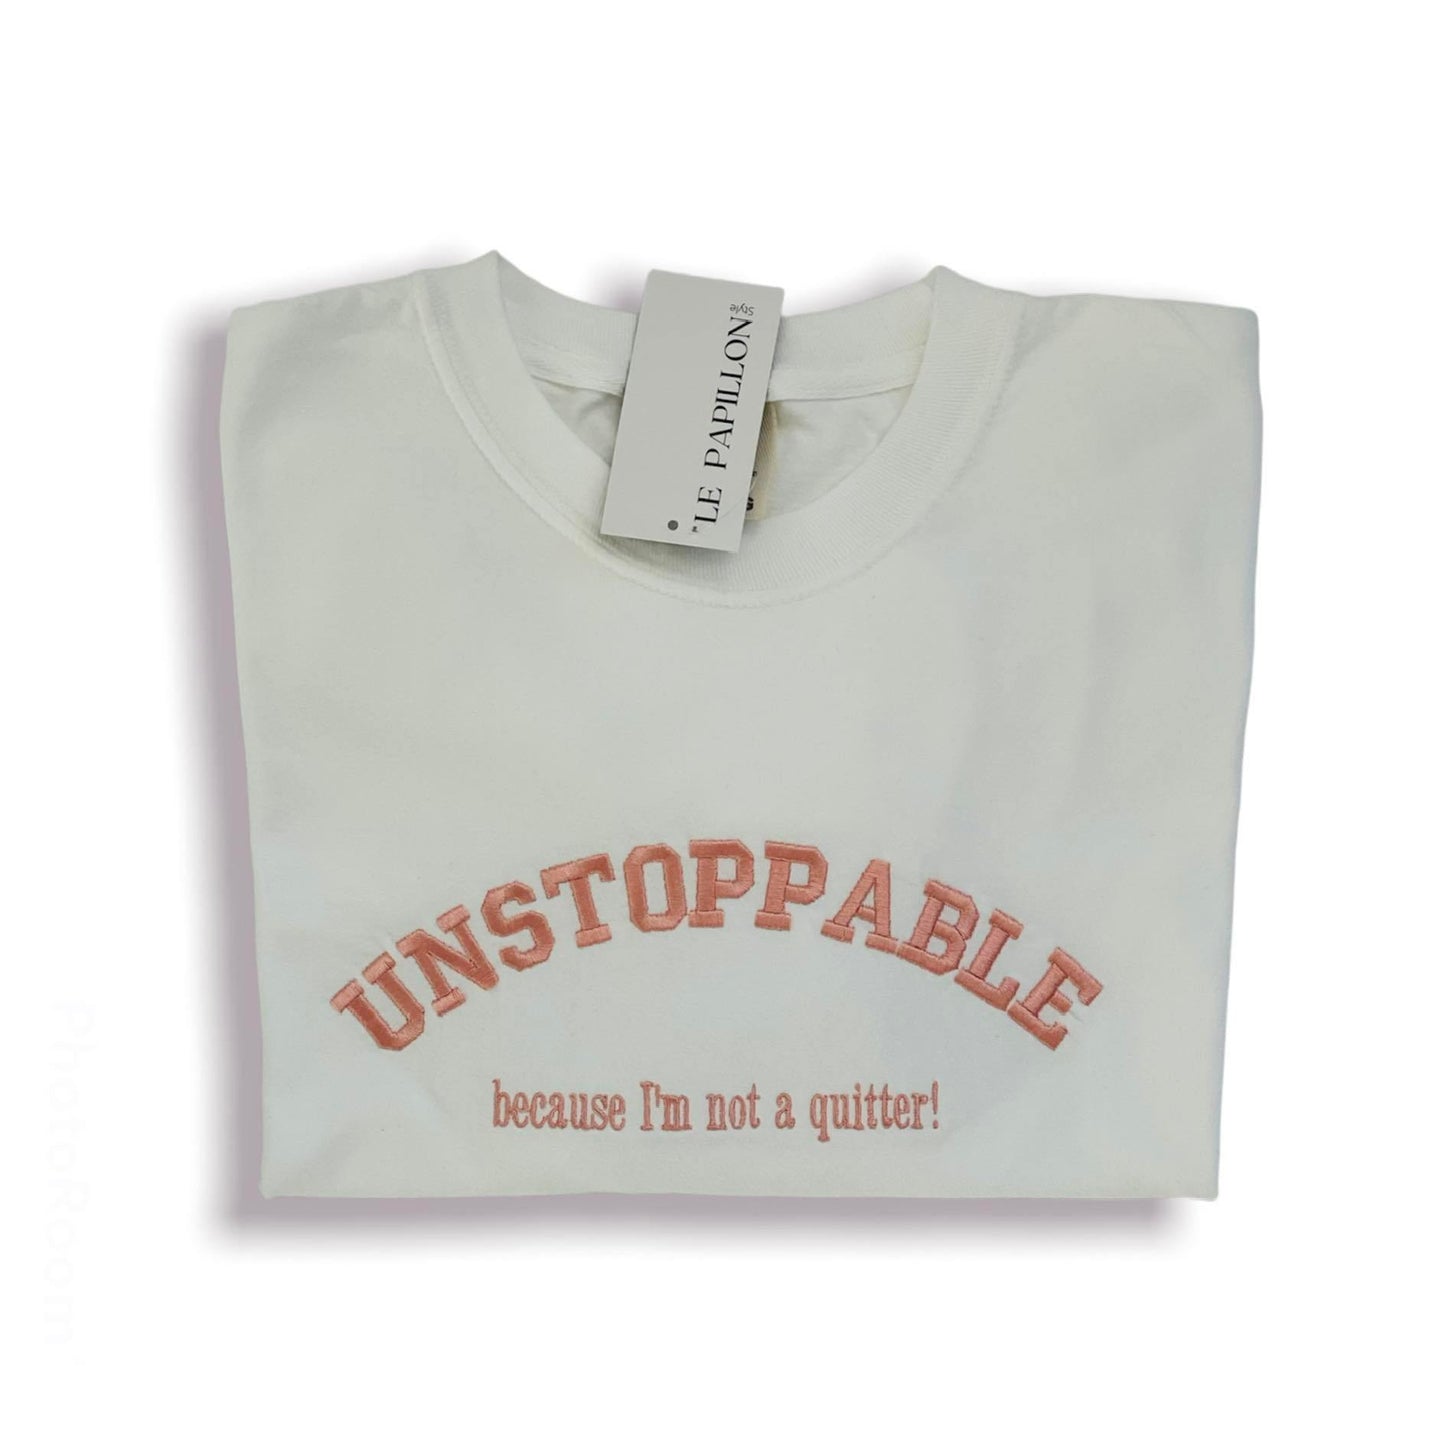 Unstoppable, because I'm not a quitter Tee